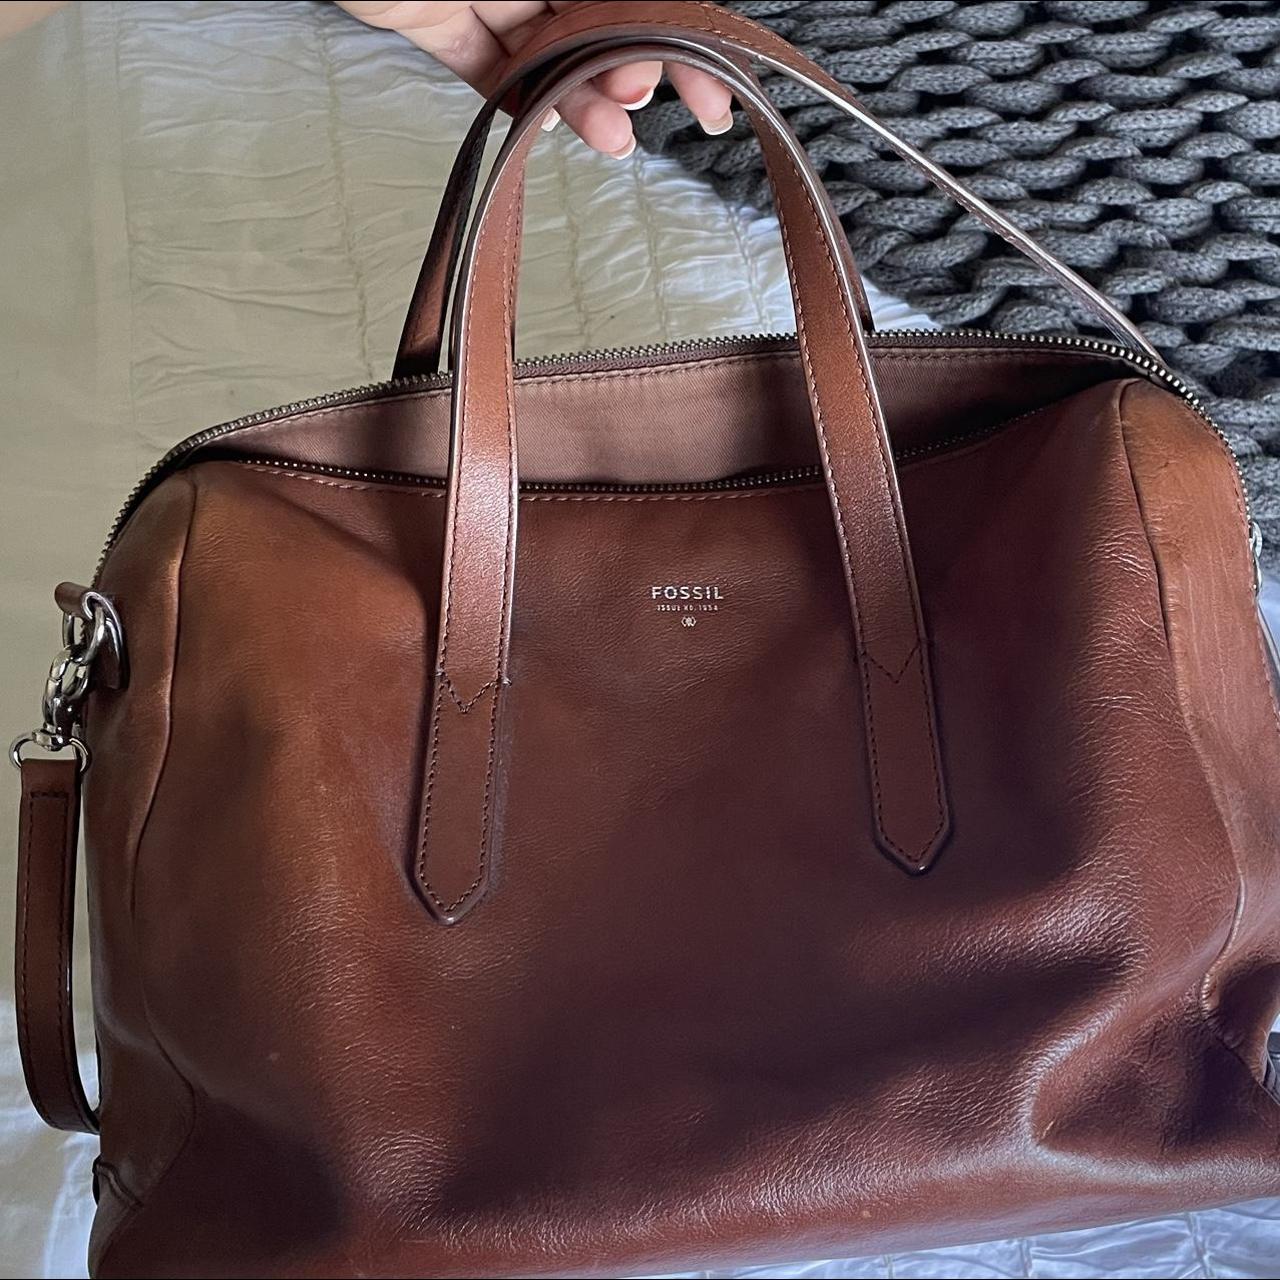 Unboxing Fossil Sydney Satchel (Chive/Olive Color) - YouTube